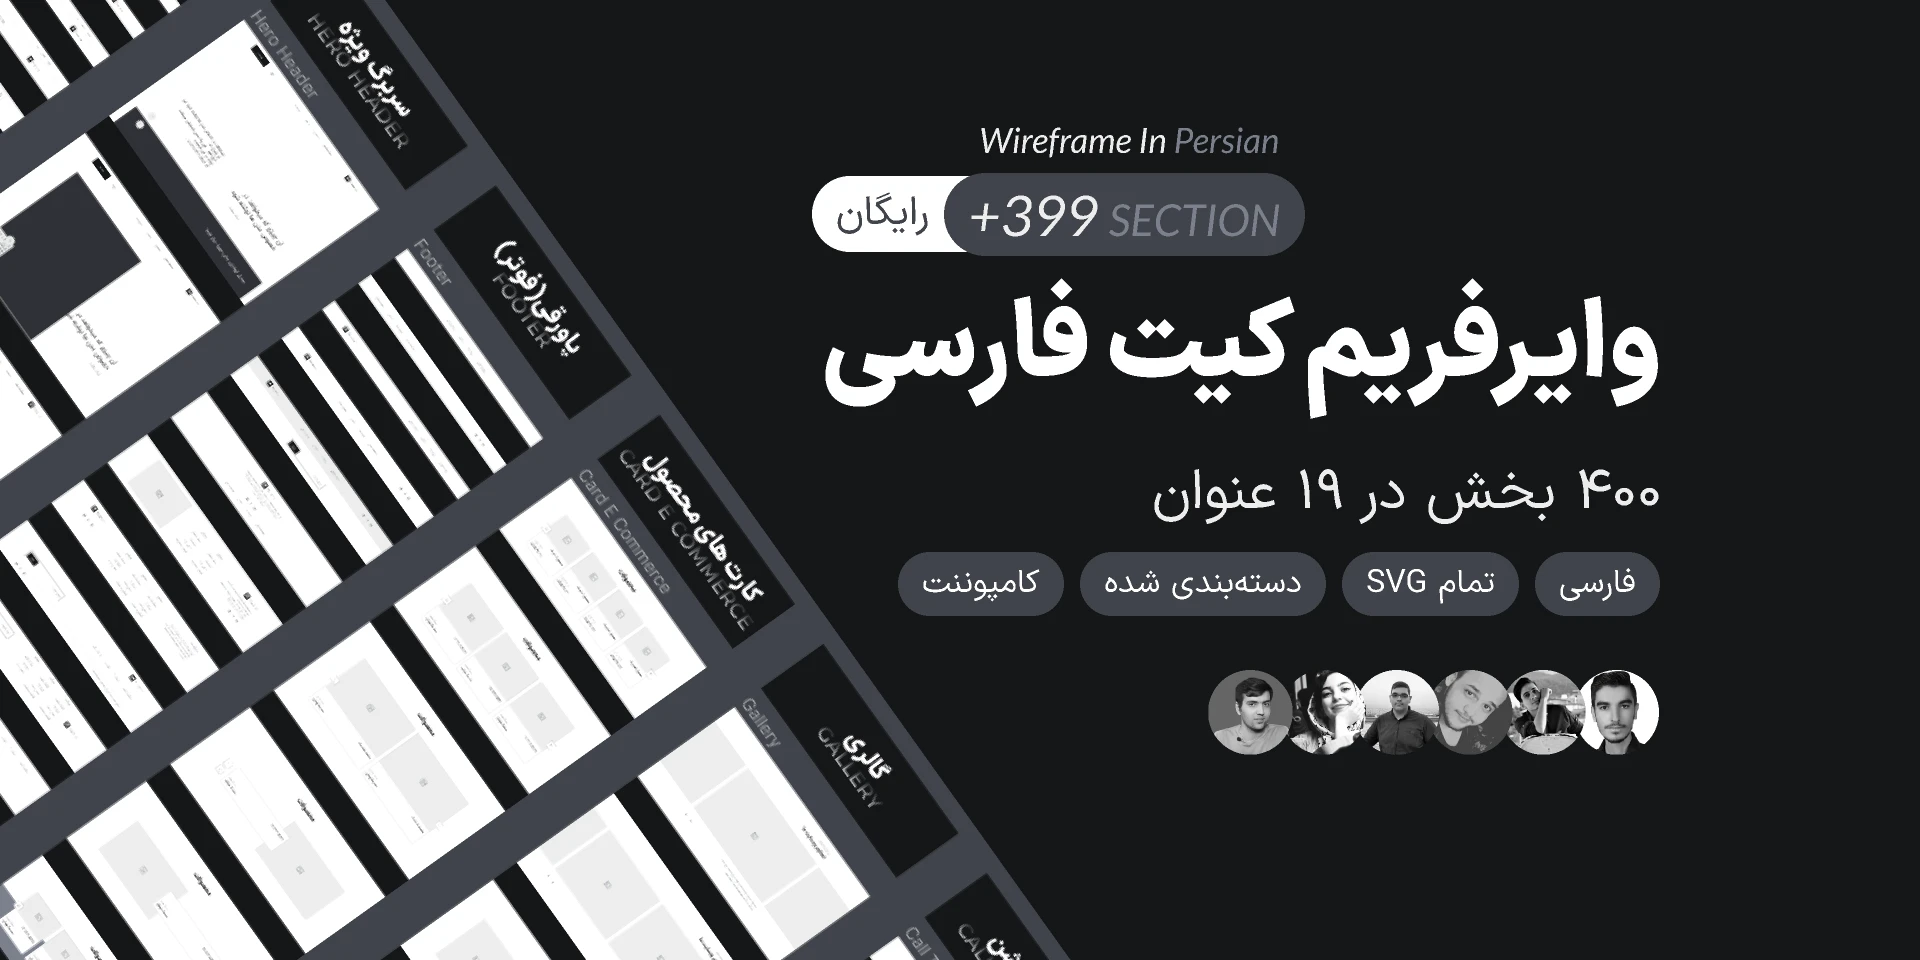 wireframe kit persian for Figma and Adobe XD